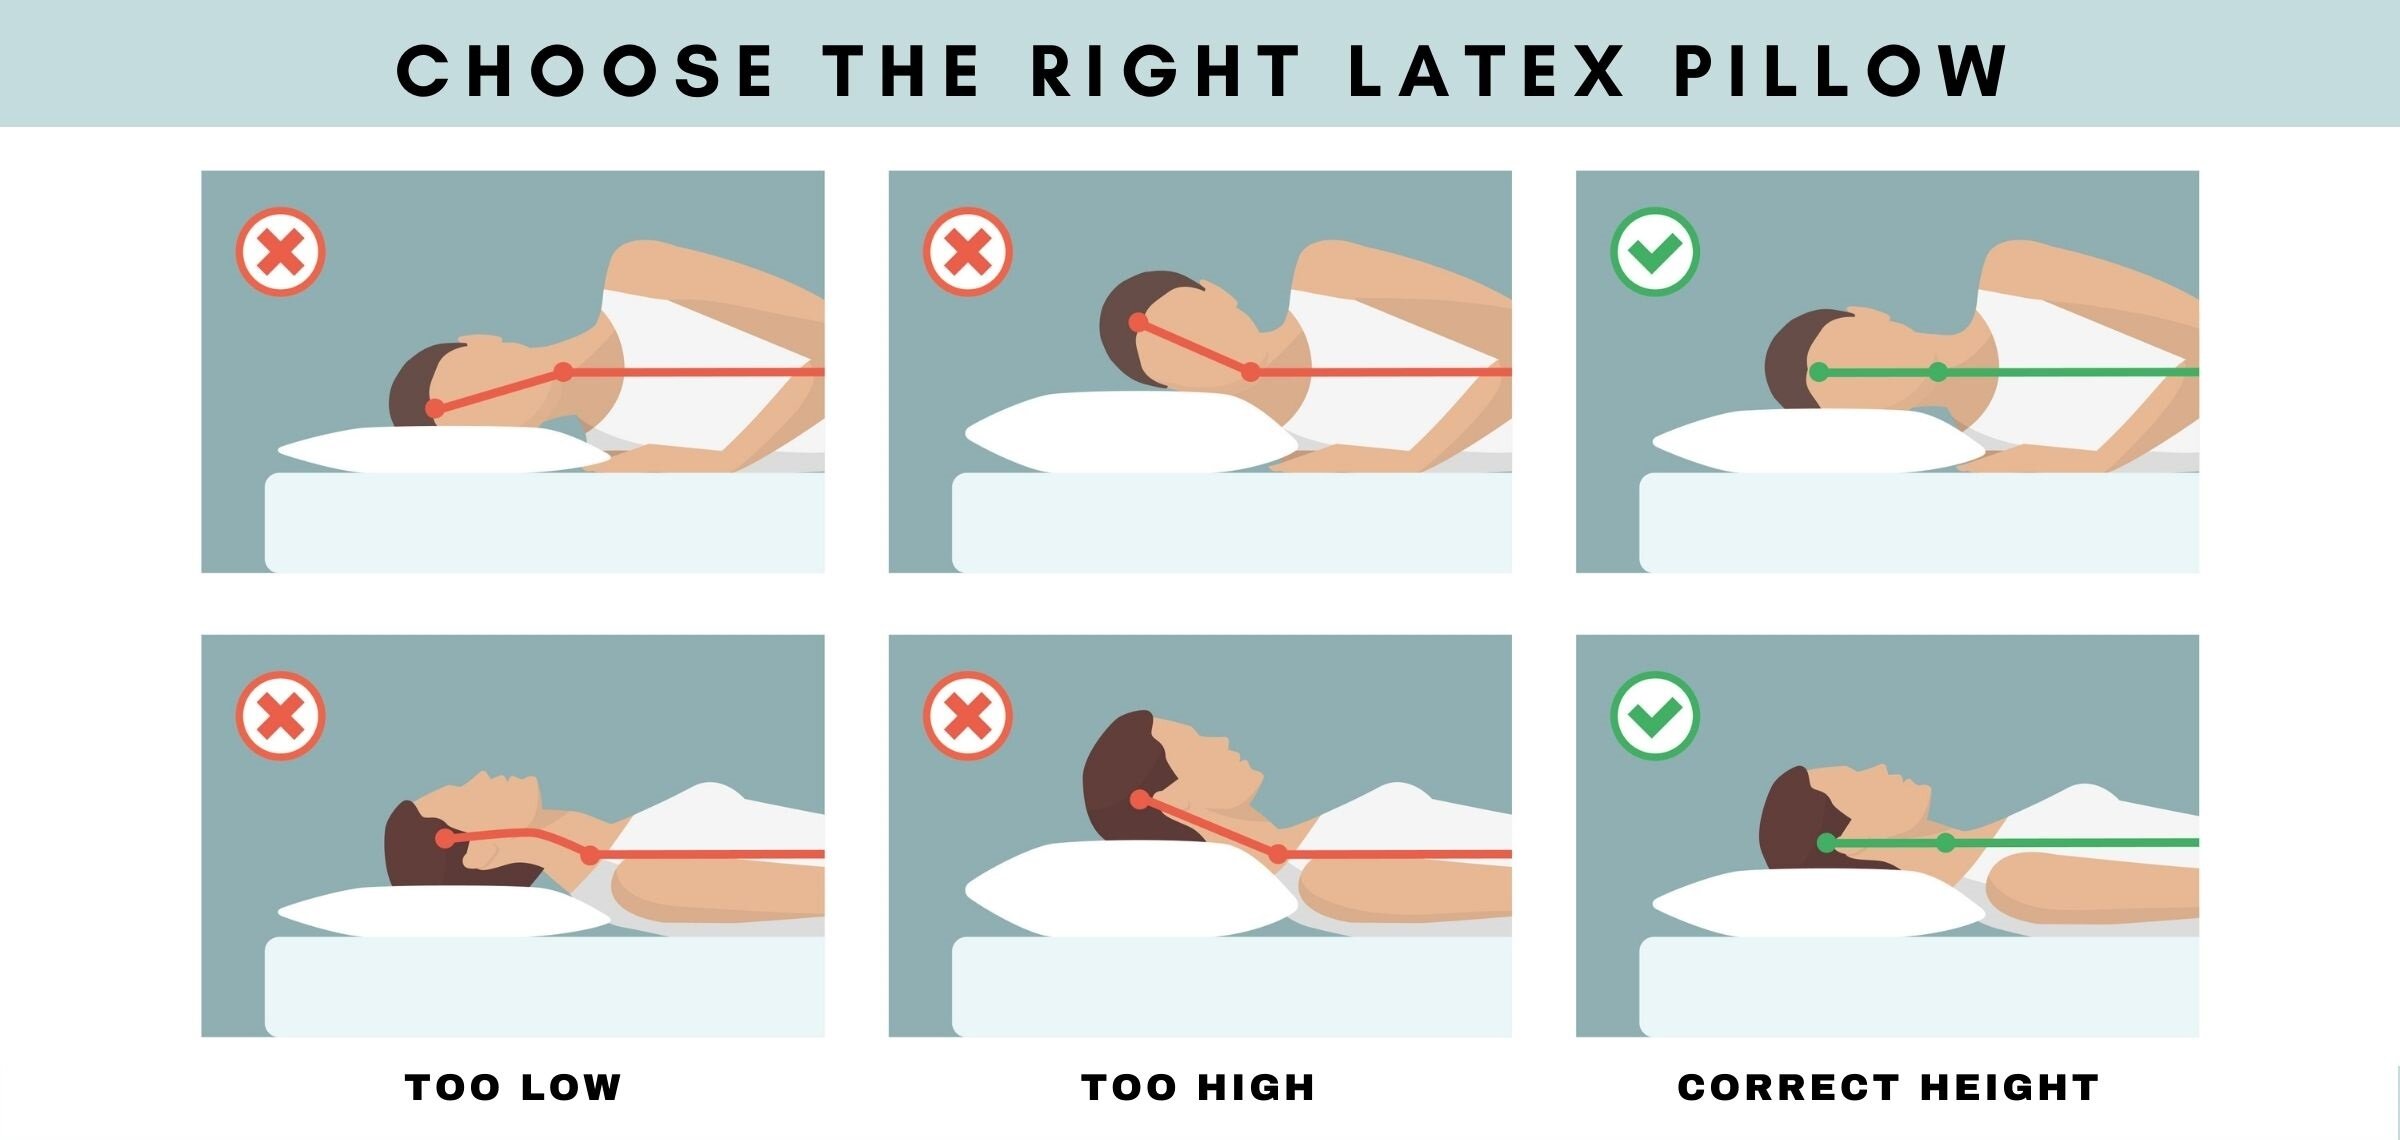 How to find the RIGHT pillow for side sleepers! 